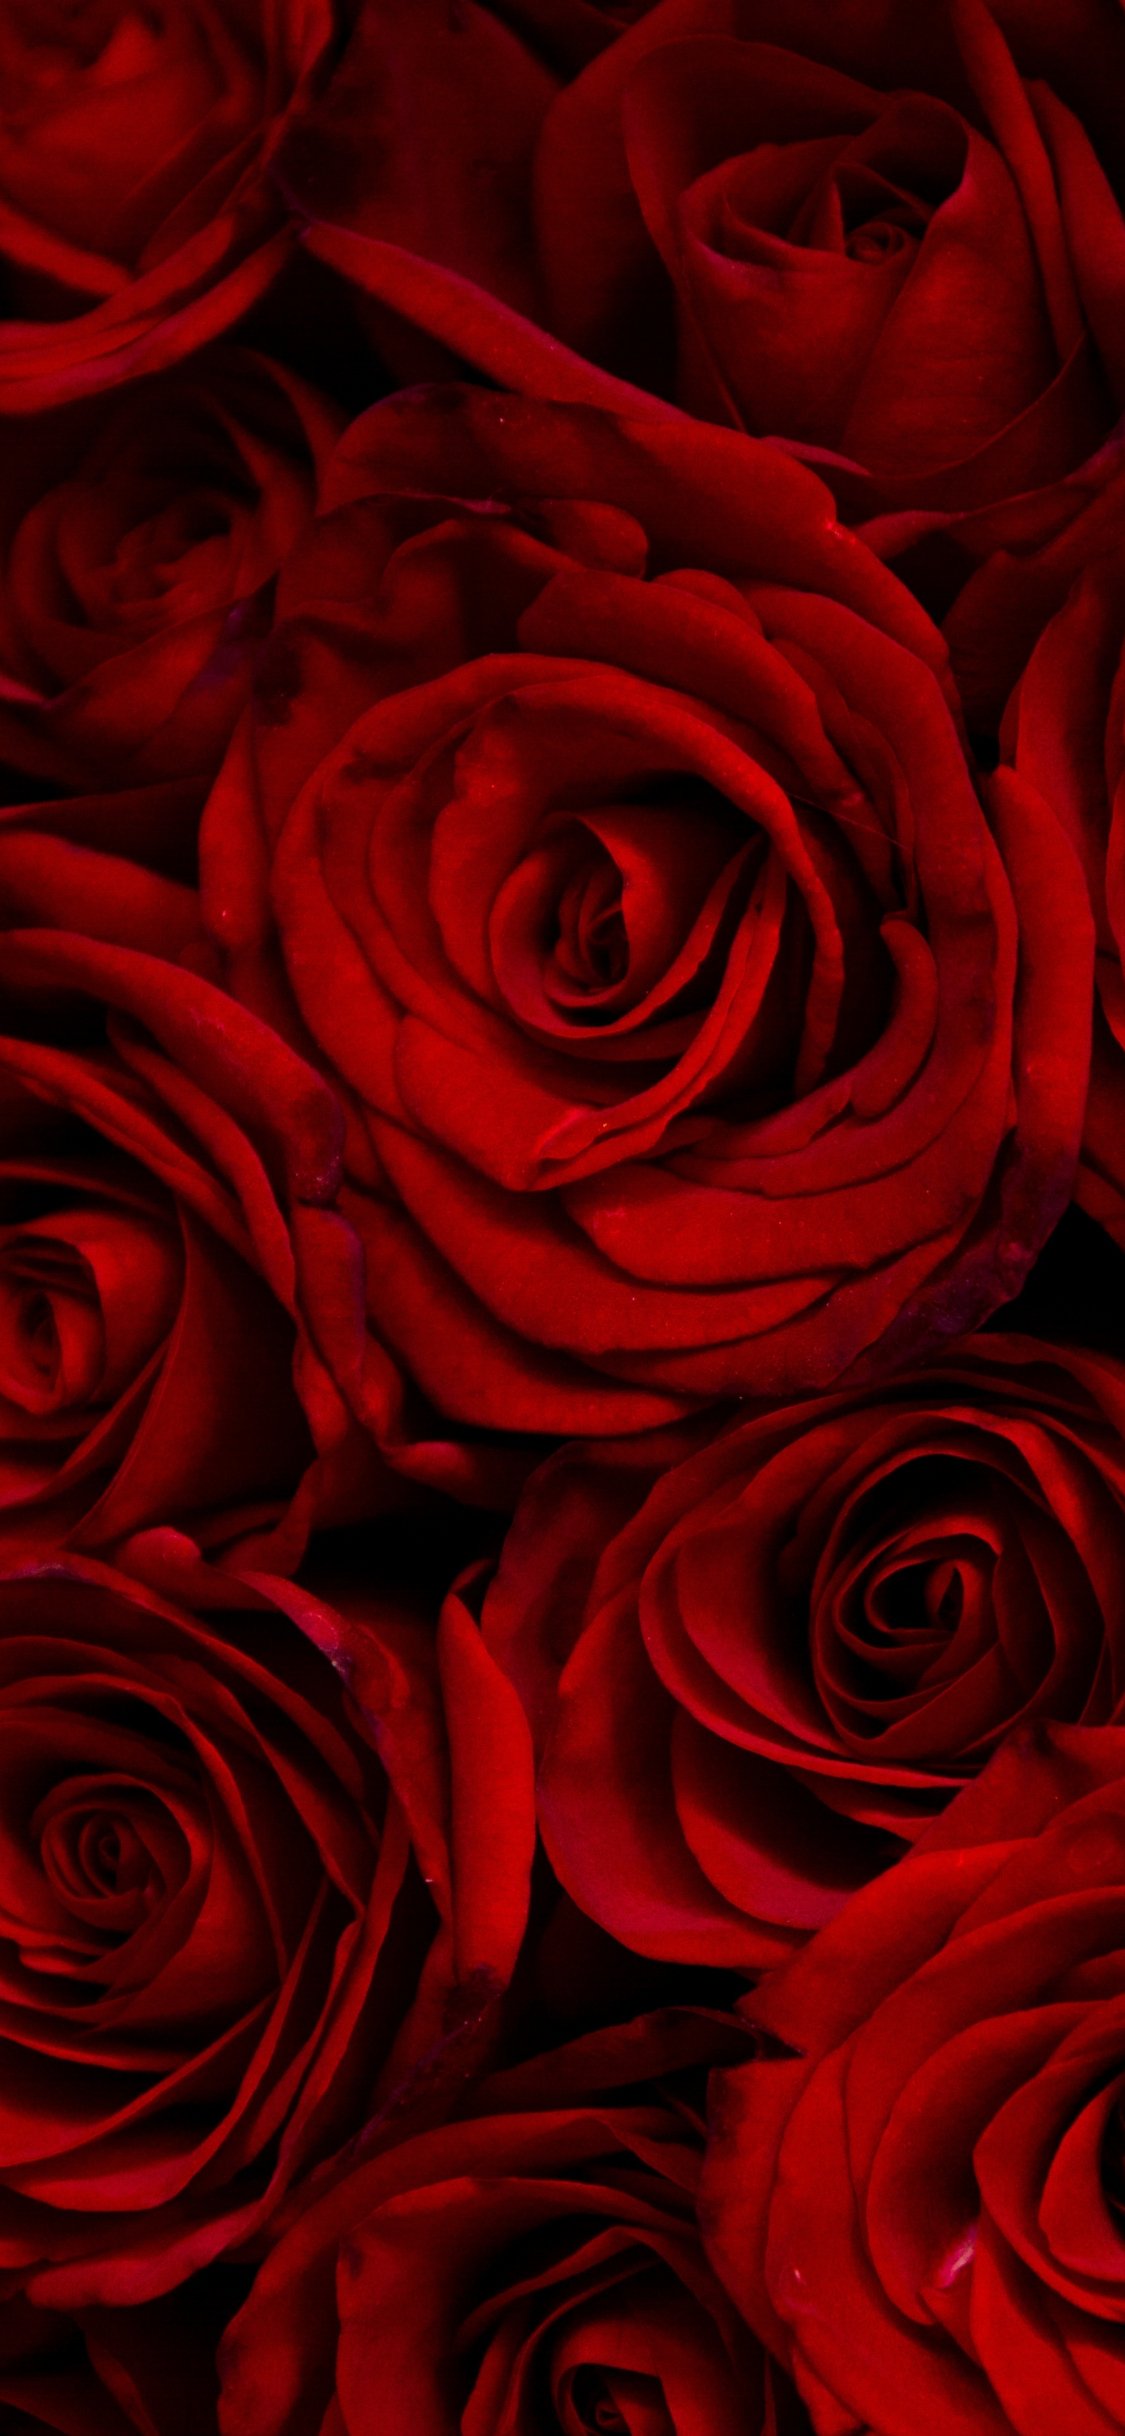 Free download 40 Rose Aesthetic Wallpaper for your iPhone Prada Pearls  600x900 for your Desktop Mobile  Tablet  Explore 37 Red Rose iPhone  Wallpapers  Wallpaper Rose Red Red Rose Black